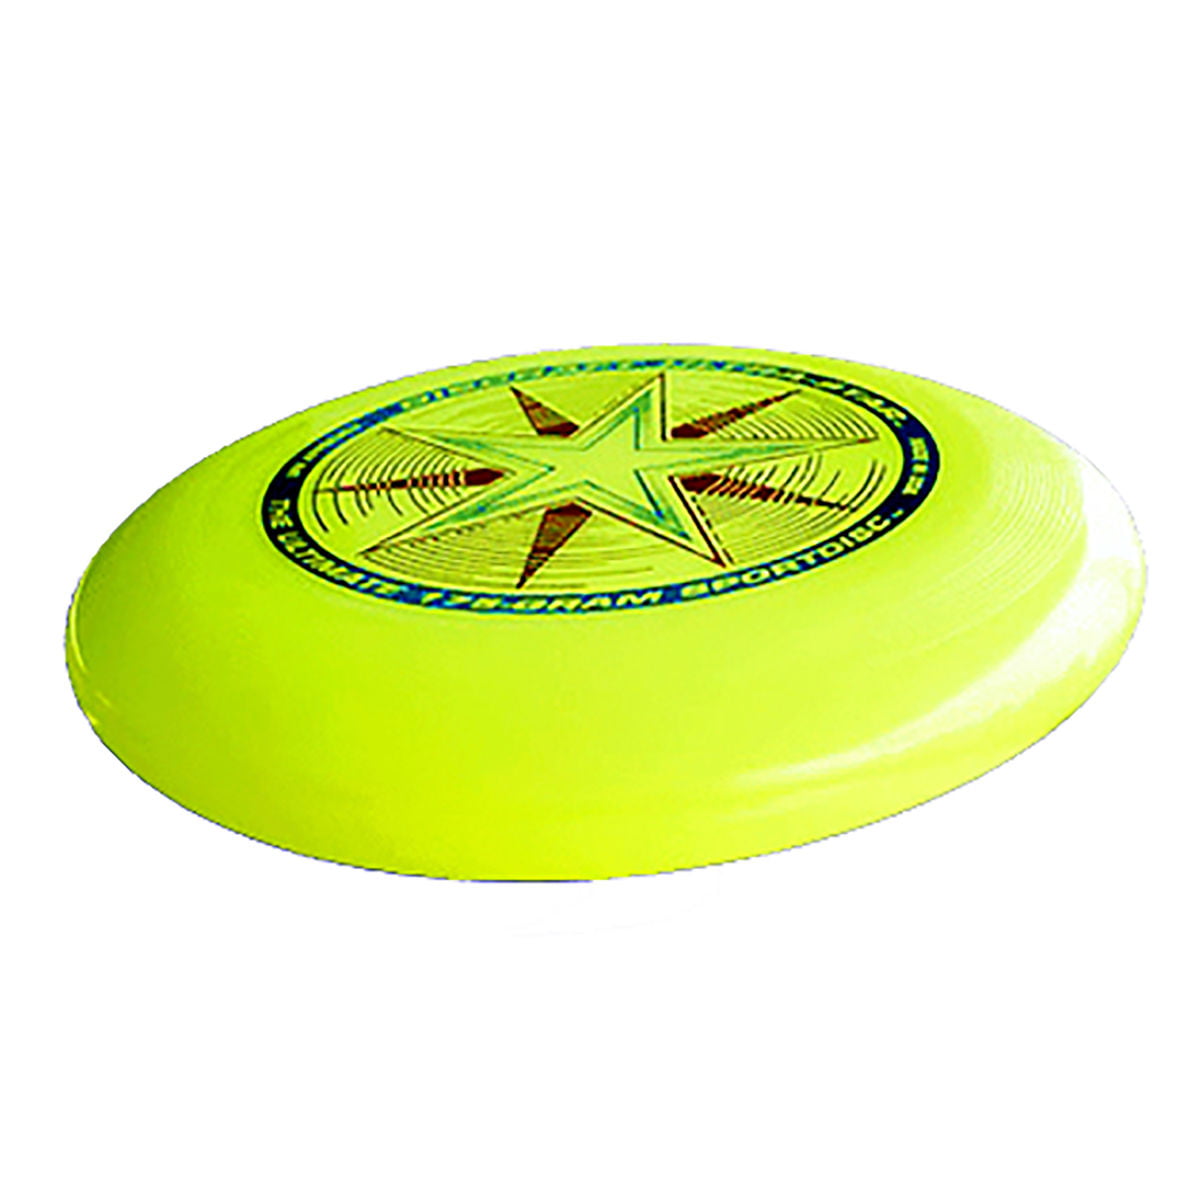 2 Pack NEW Discraft ULTRA-STAR 175g Ultimate Frisbee Disc YELLOW/YELLOW 